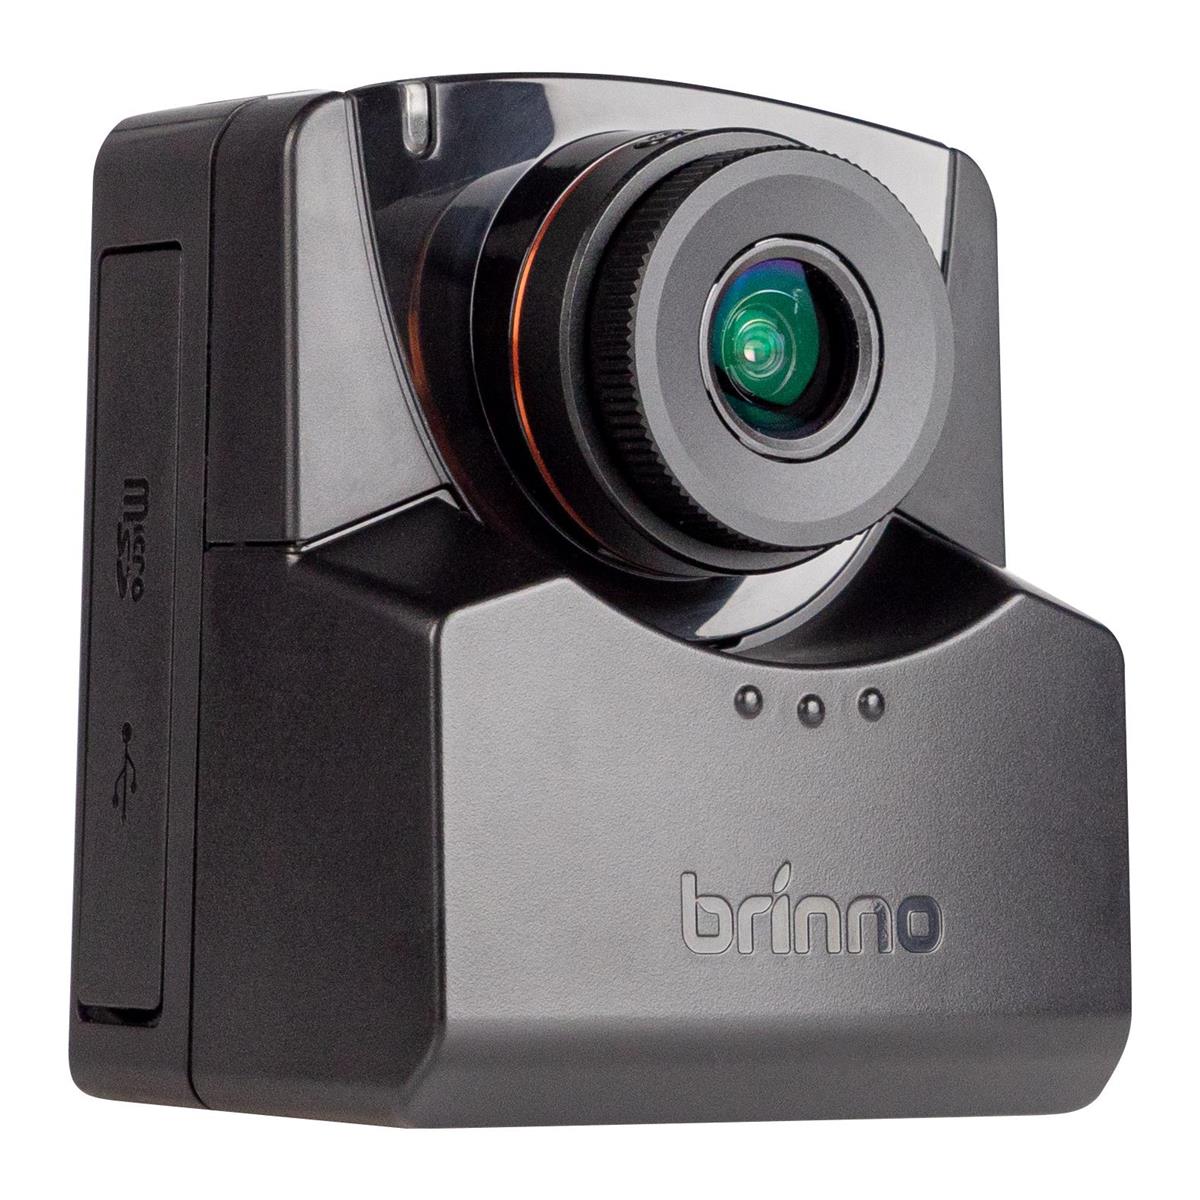 Brinno BBT2000 HEALTH DEFENDER Time Lapse Camera FHD with Mount Stand Filming Schedule Capture Interval for Contact Tracing Device Step Video Stop Motion Still Photo